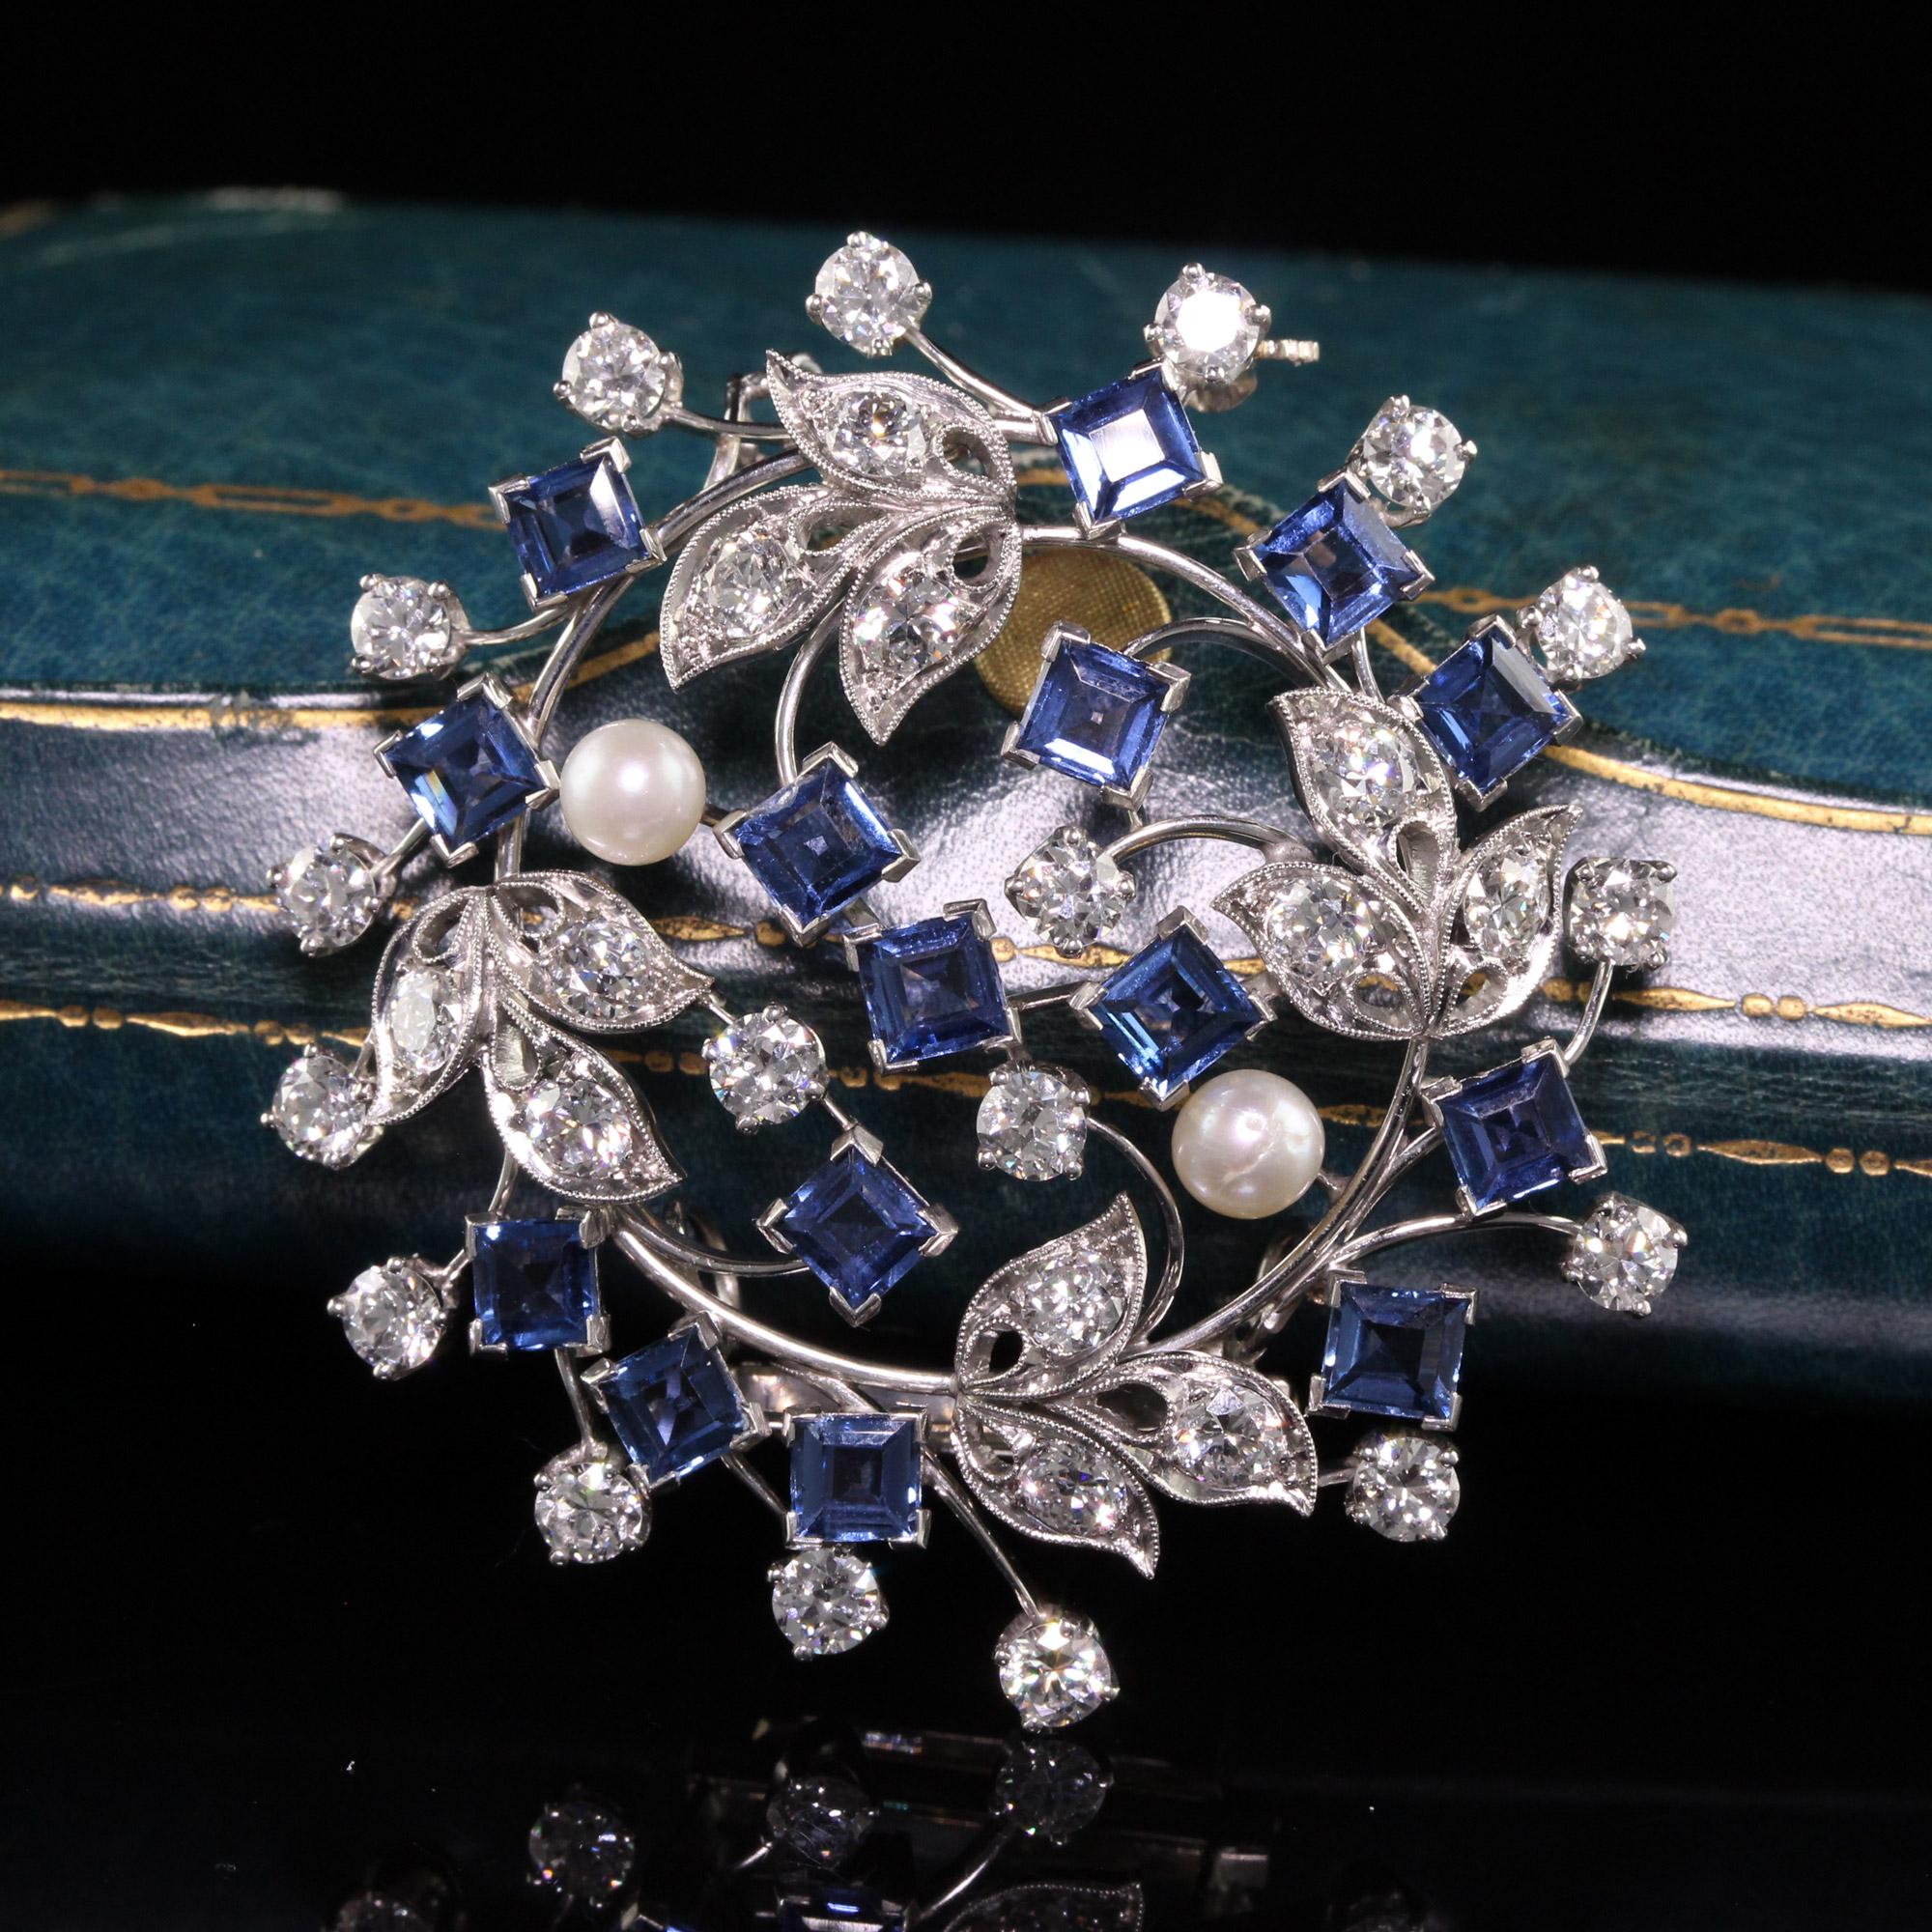 Beautiful Antique Art Deco Raymond Yard Platinum Old Cut Diamond Yogo Sapphire Pin Pendant. This incredible pin is crafted in platinum and 18K white gold. This piece has old european cut diamonds and natural yogo gulch sapphires. Yogo Gulch